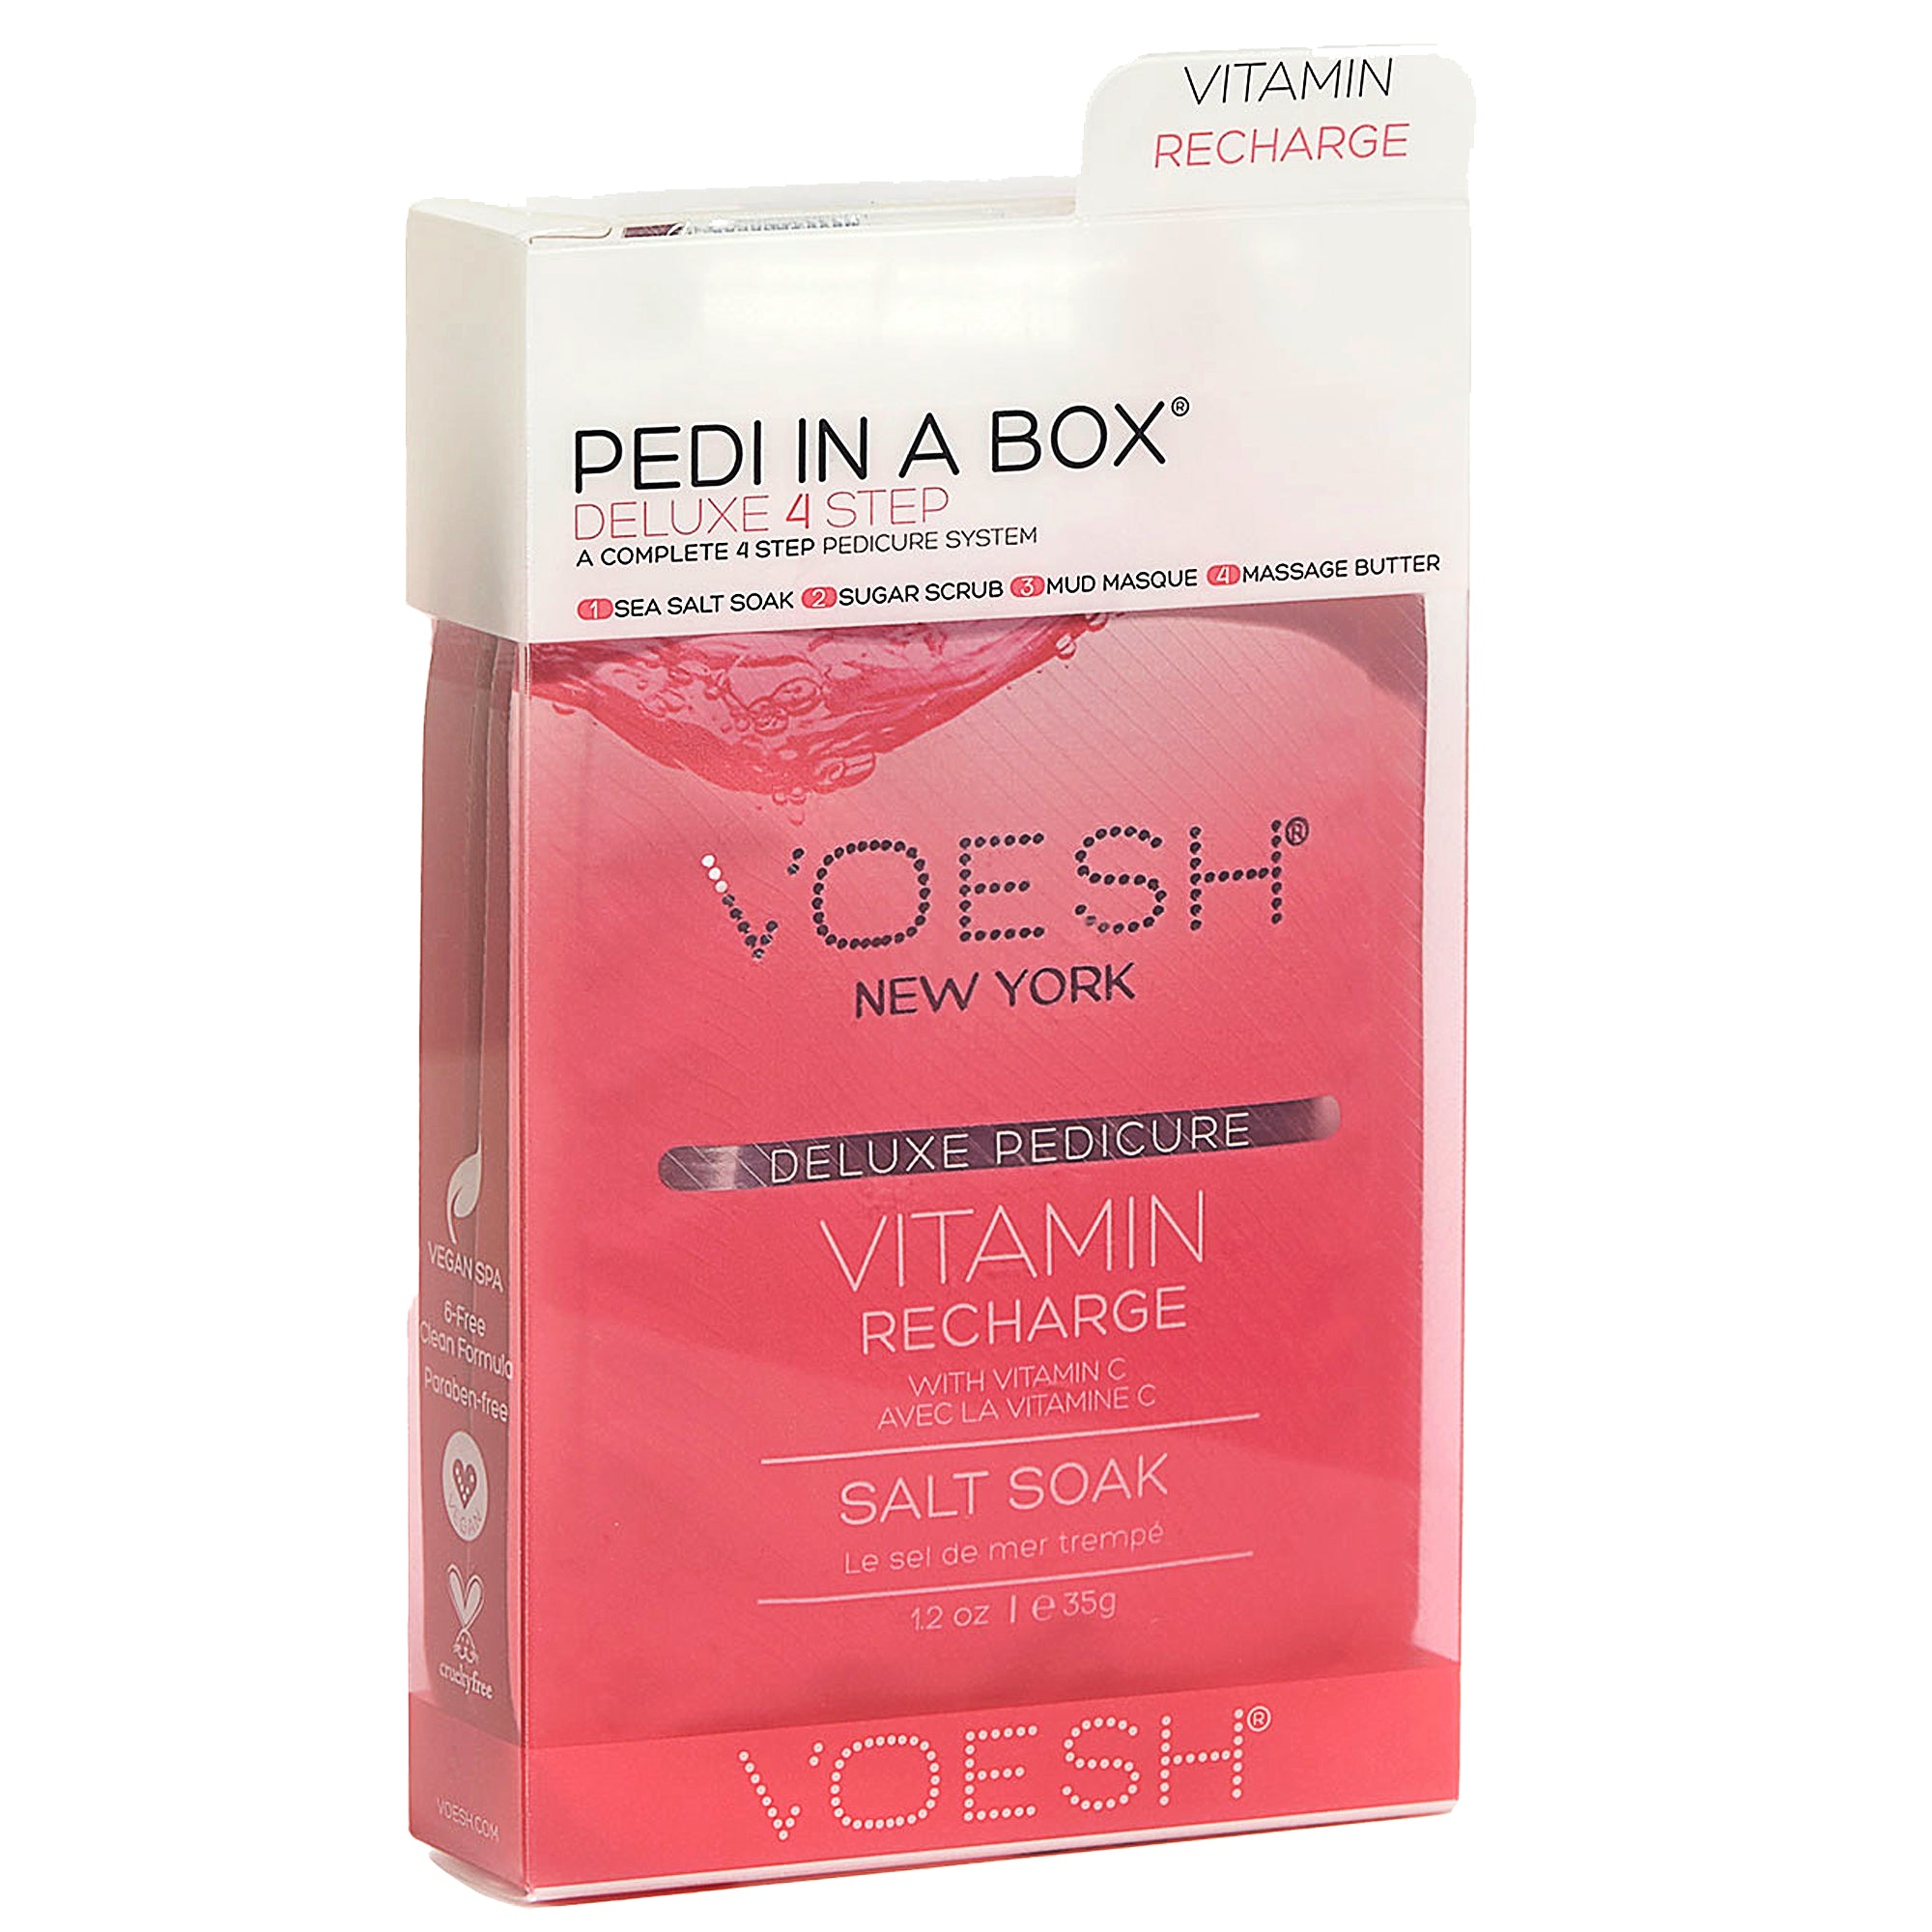 Voesh - Pedi in a Box Deluxe 4 Step | Vitamin Recharge - Pack